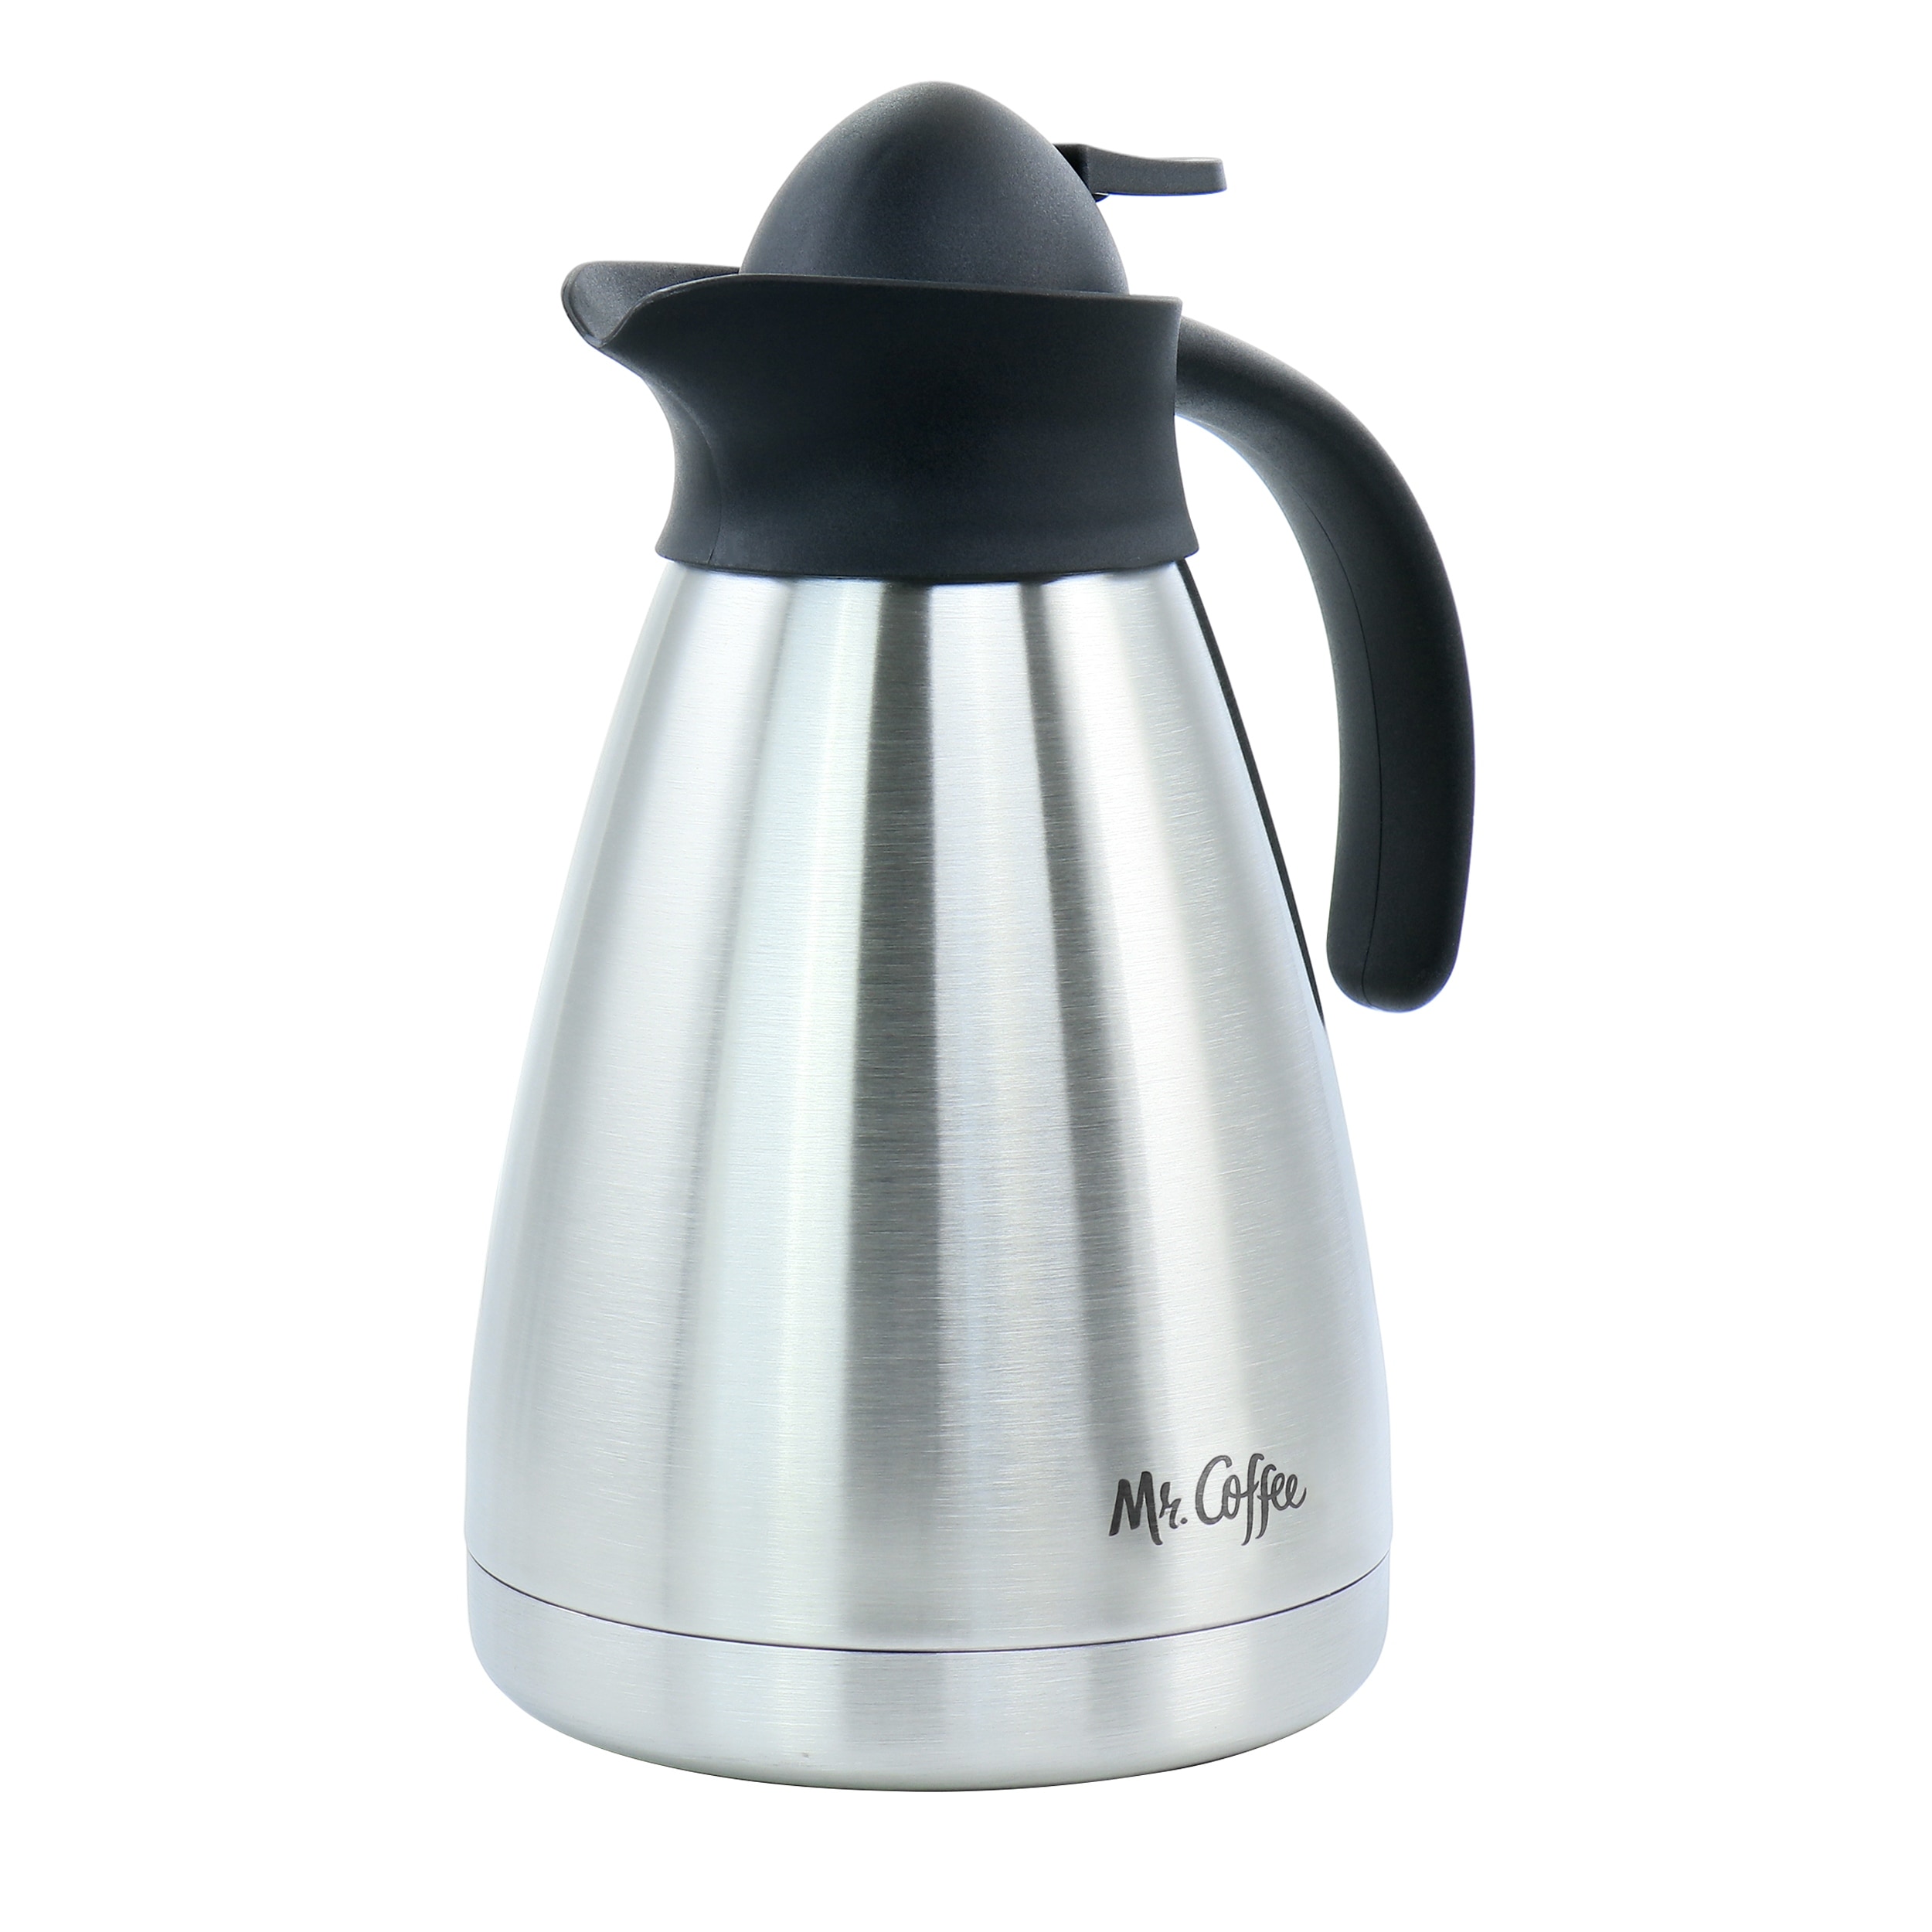 https://ak1.ostkcdn.com/images/products/is/images/direct/7e073a02c724f9e6328551058c5d4bf7c5e09caa/Mr.Coffee-1-Quart-Insulated-Stainless-Steel-Thermal-Coffee-Pot.jpg